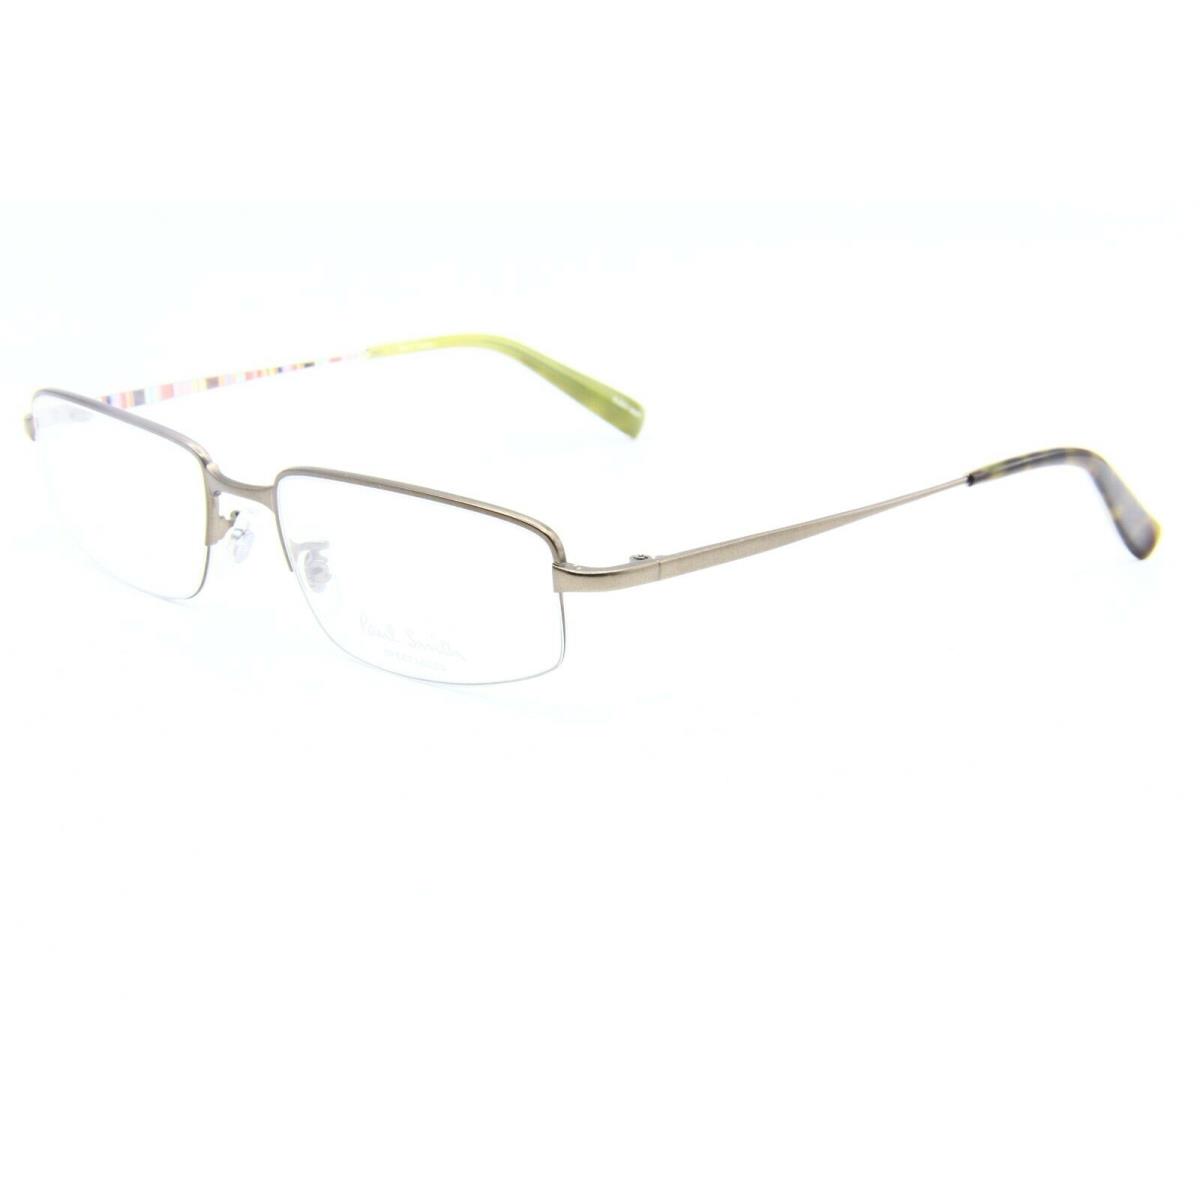 Paul Smith PS-1005 W Brown Eyeglasses Frame RX 51-17